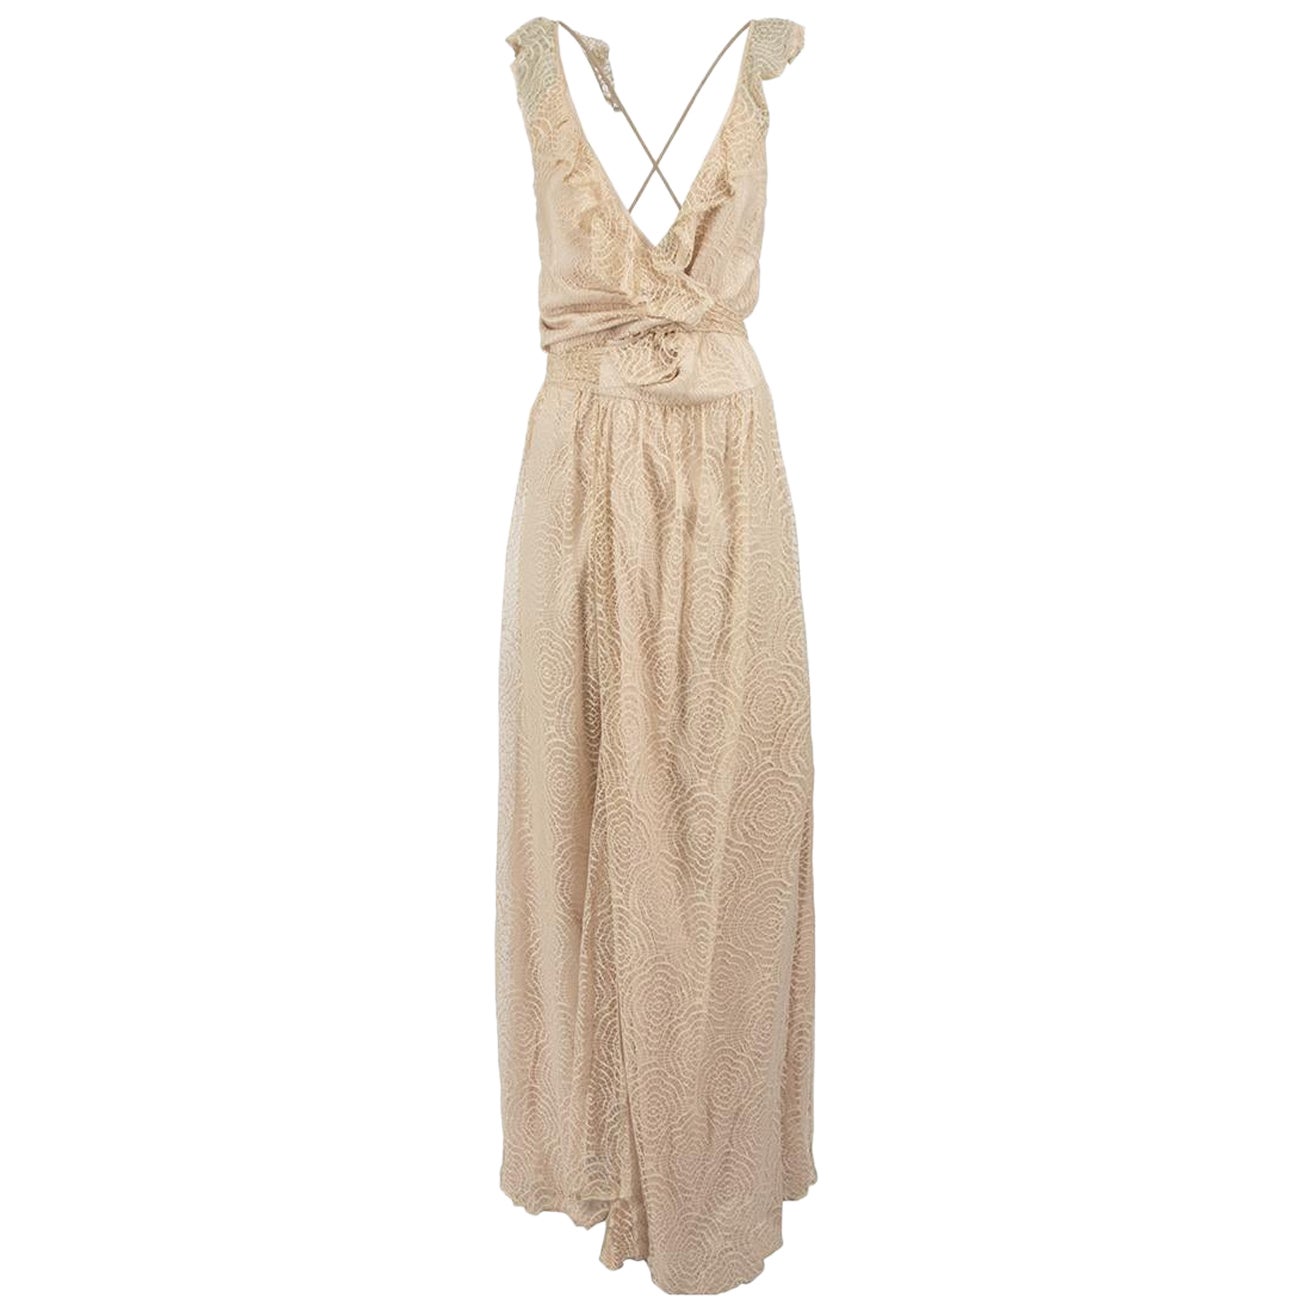 Joanna August Ceremony by Joanna August Beige Lace Wrap Dress Size M For Sale